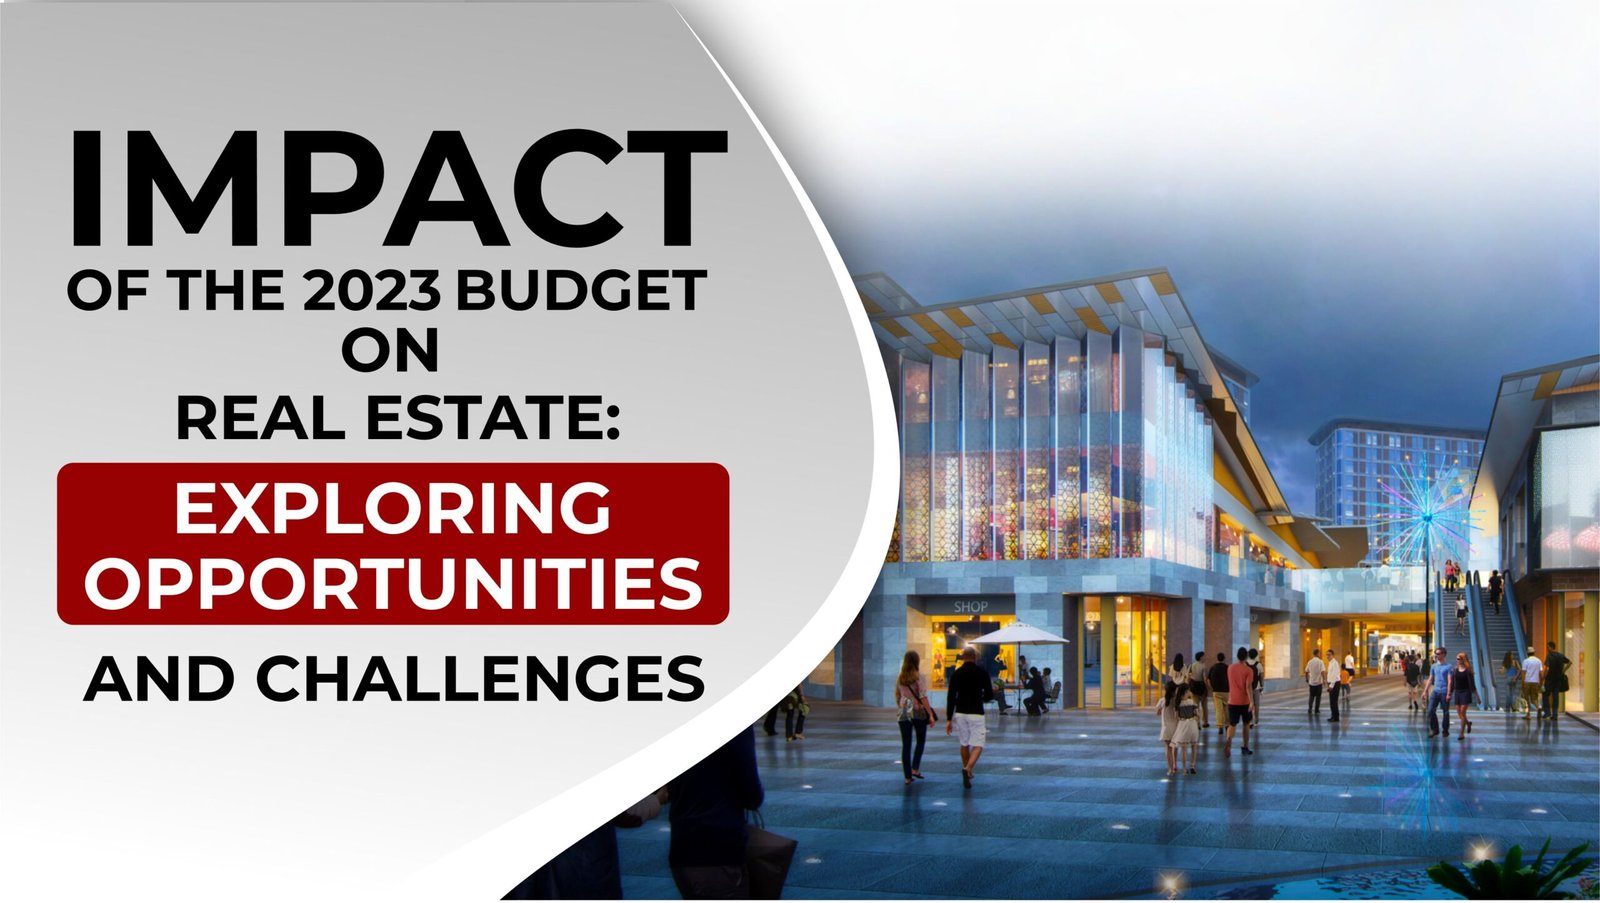 Impact Of The 2023 Budget On Real Estate Exploring Opportunities And Challenges Scaled 